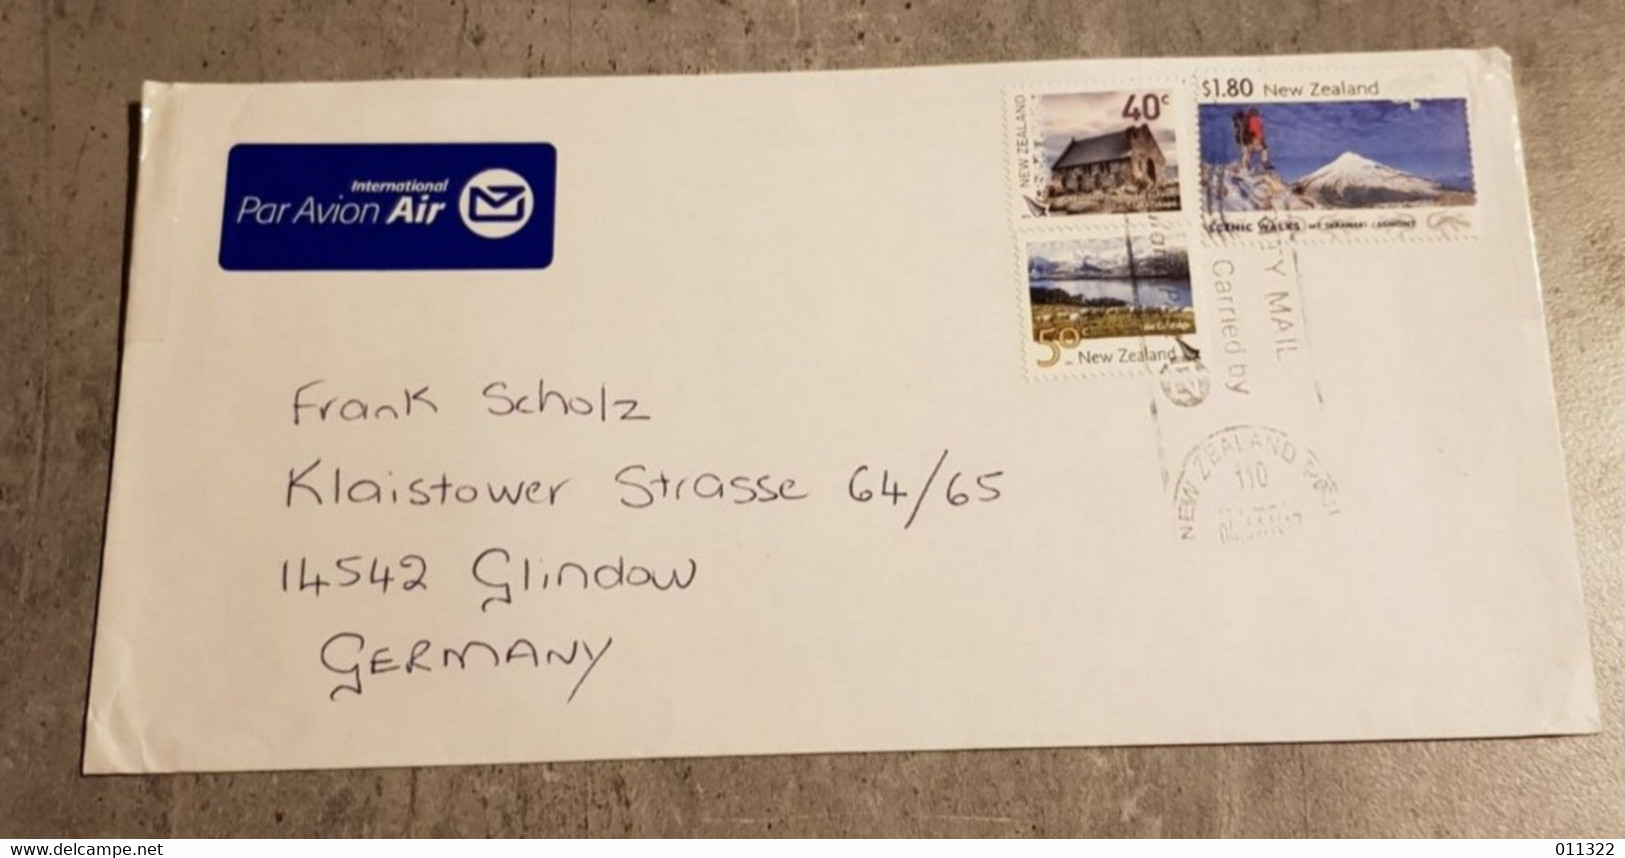 NEW ZEALAND COVER CIRCULED SEND TO GERMANY - Luftpost